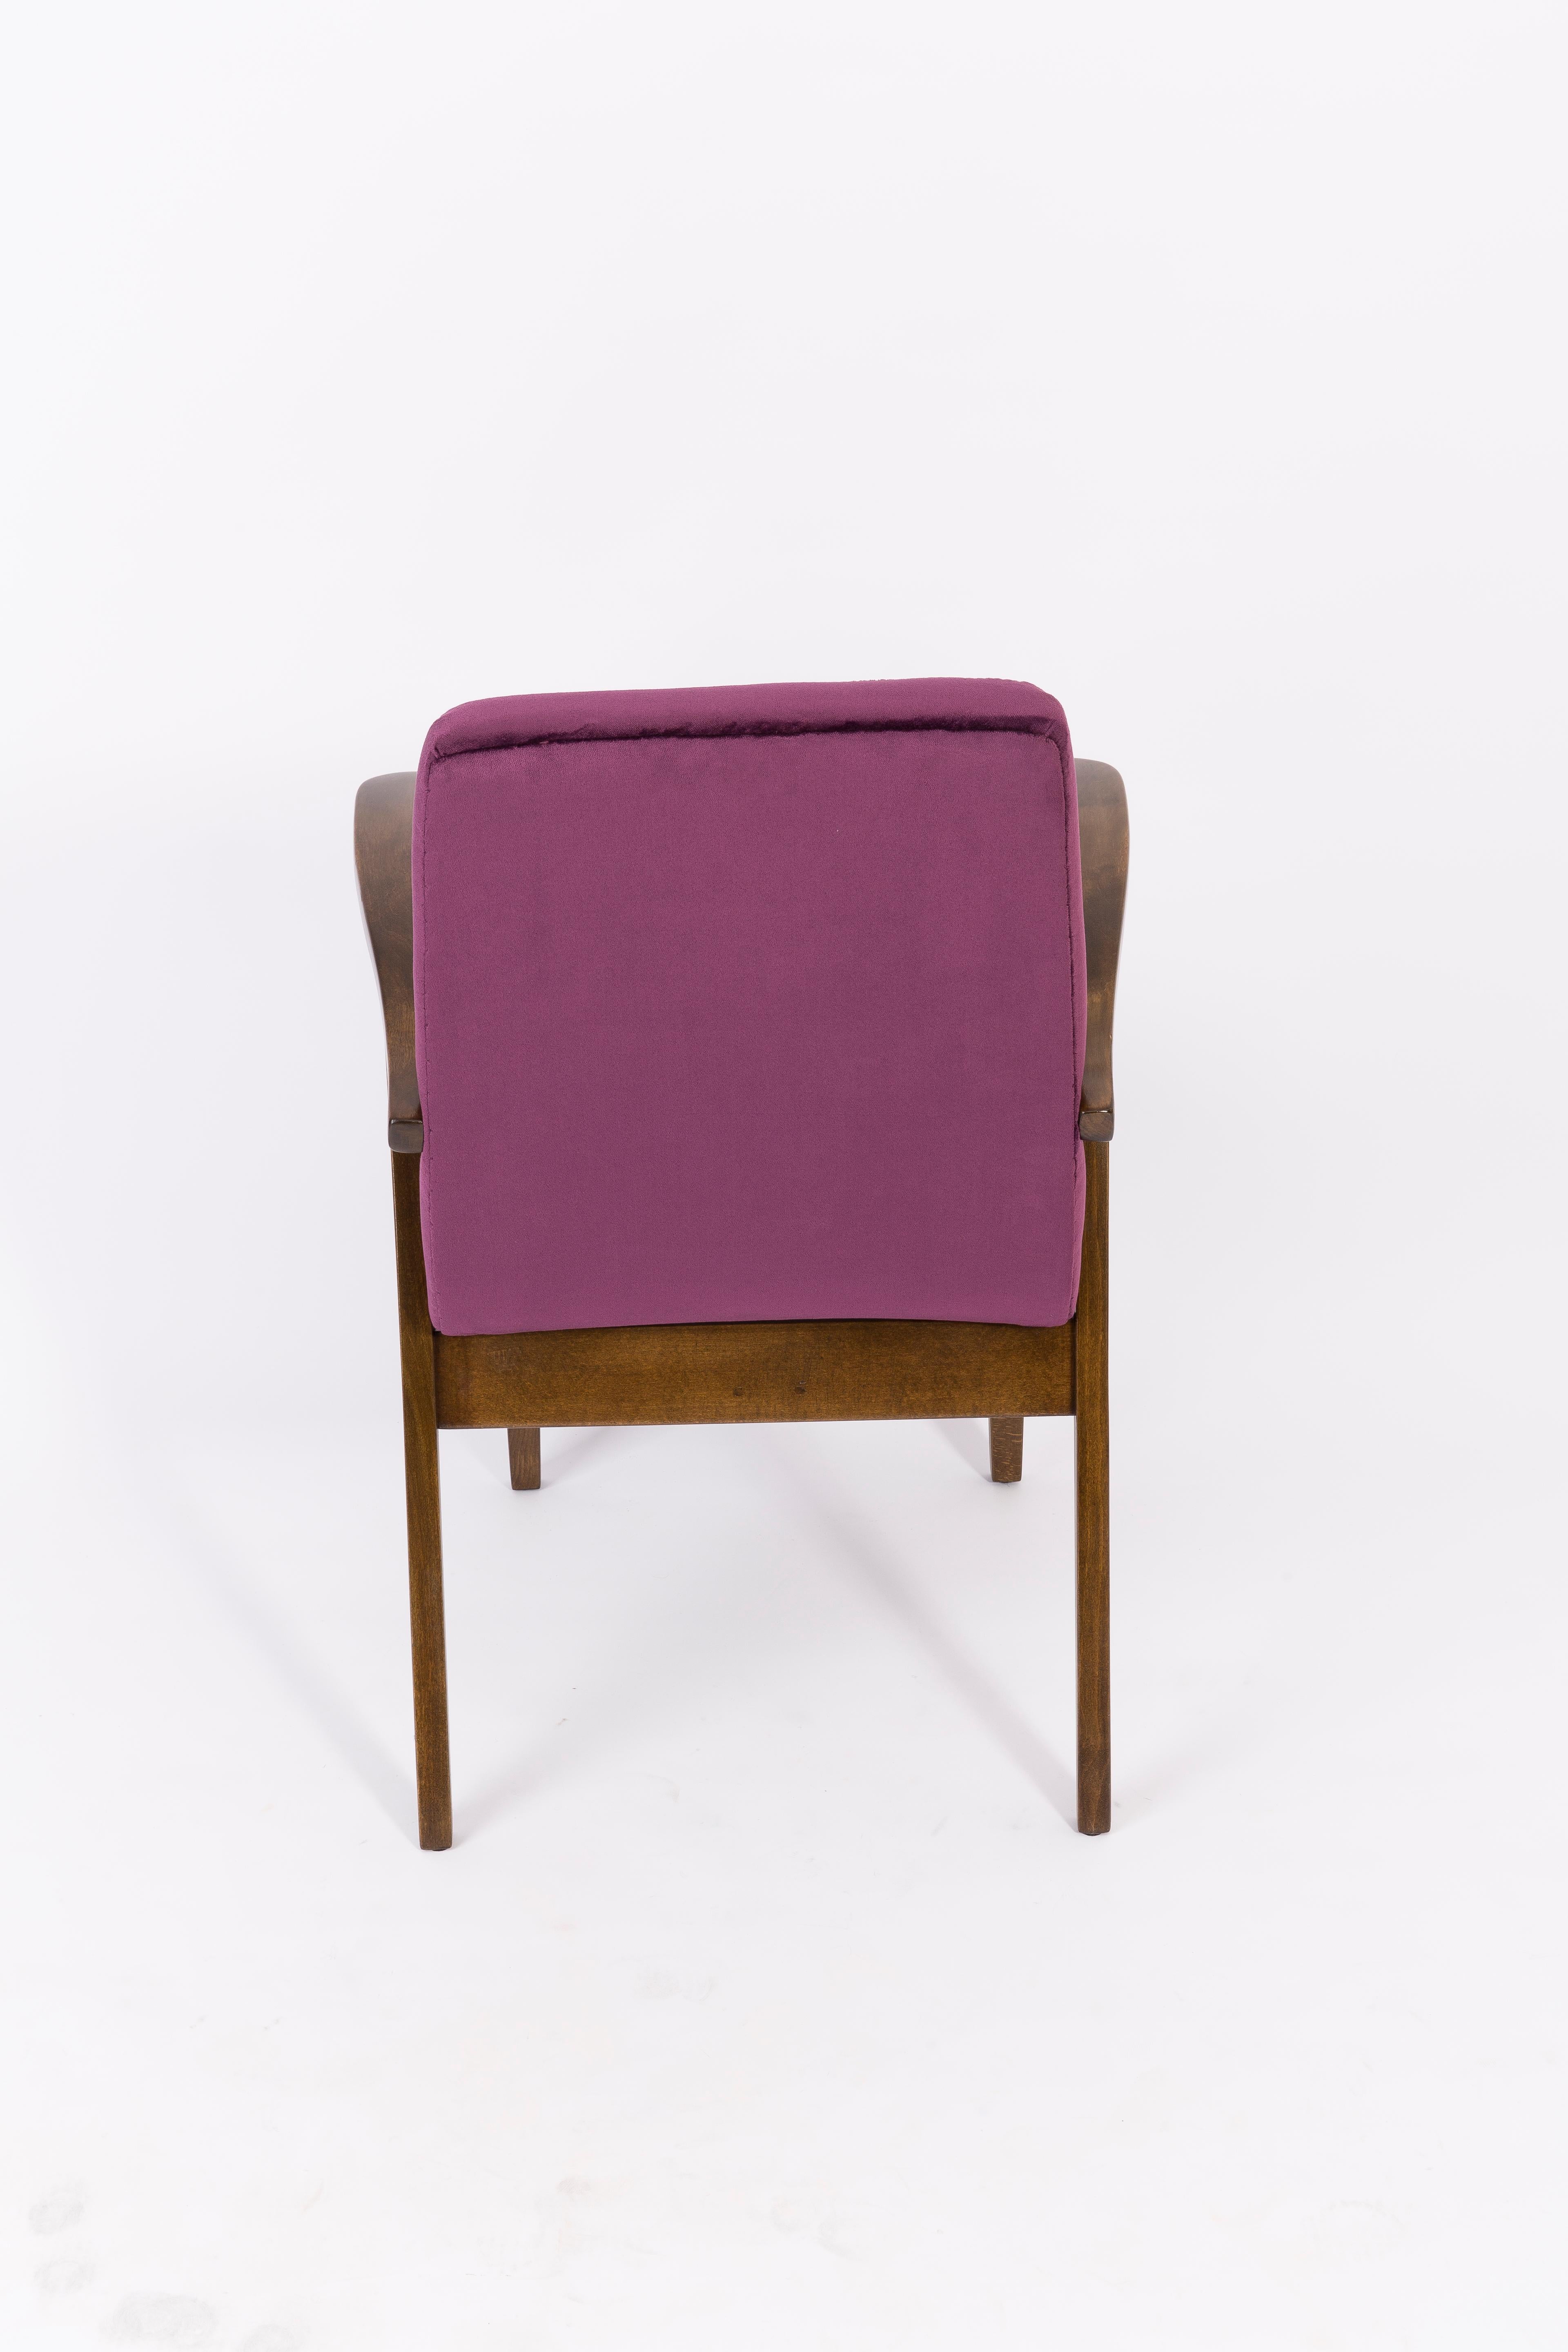 Set of Two 20th Century Vintage Plum Violet Armchair by Mieczyslaw Puchala 1960s In Excellent Condition For Sale In 05-080 Hornowek, PL